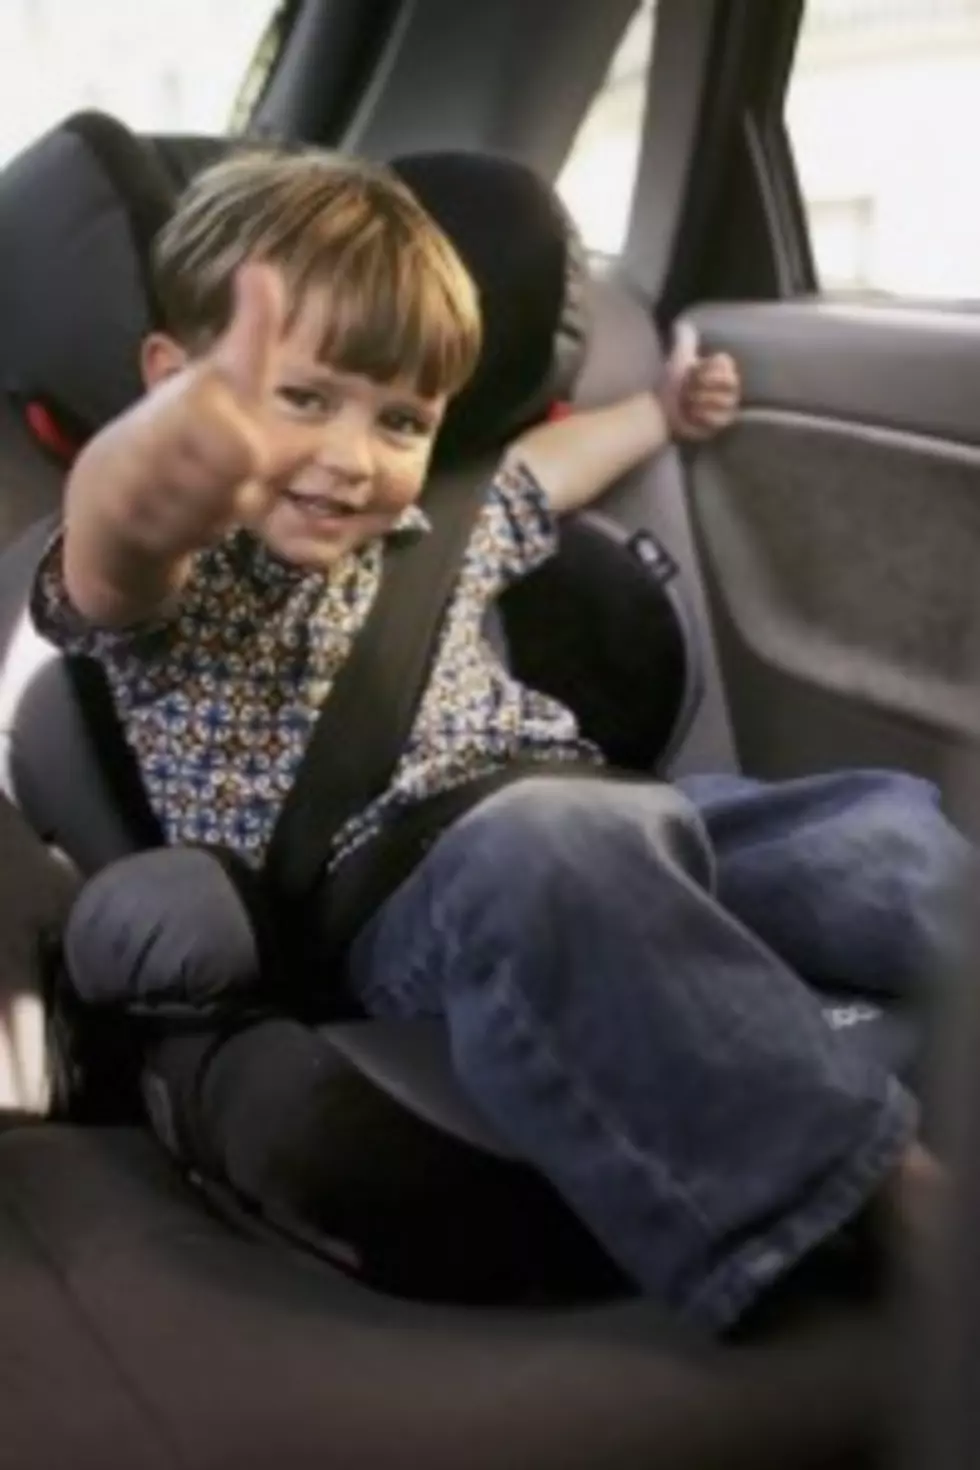 Child Booster Seats Not Perfect for Every Vehicle